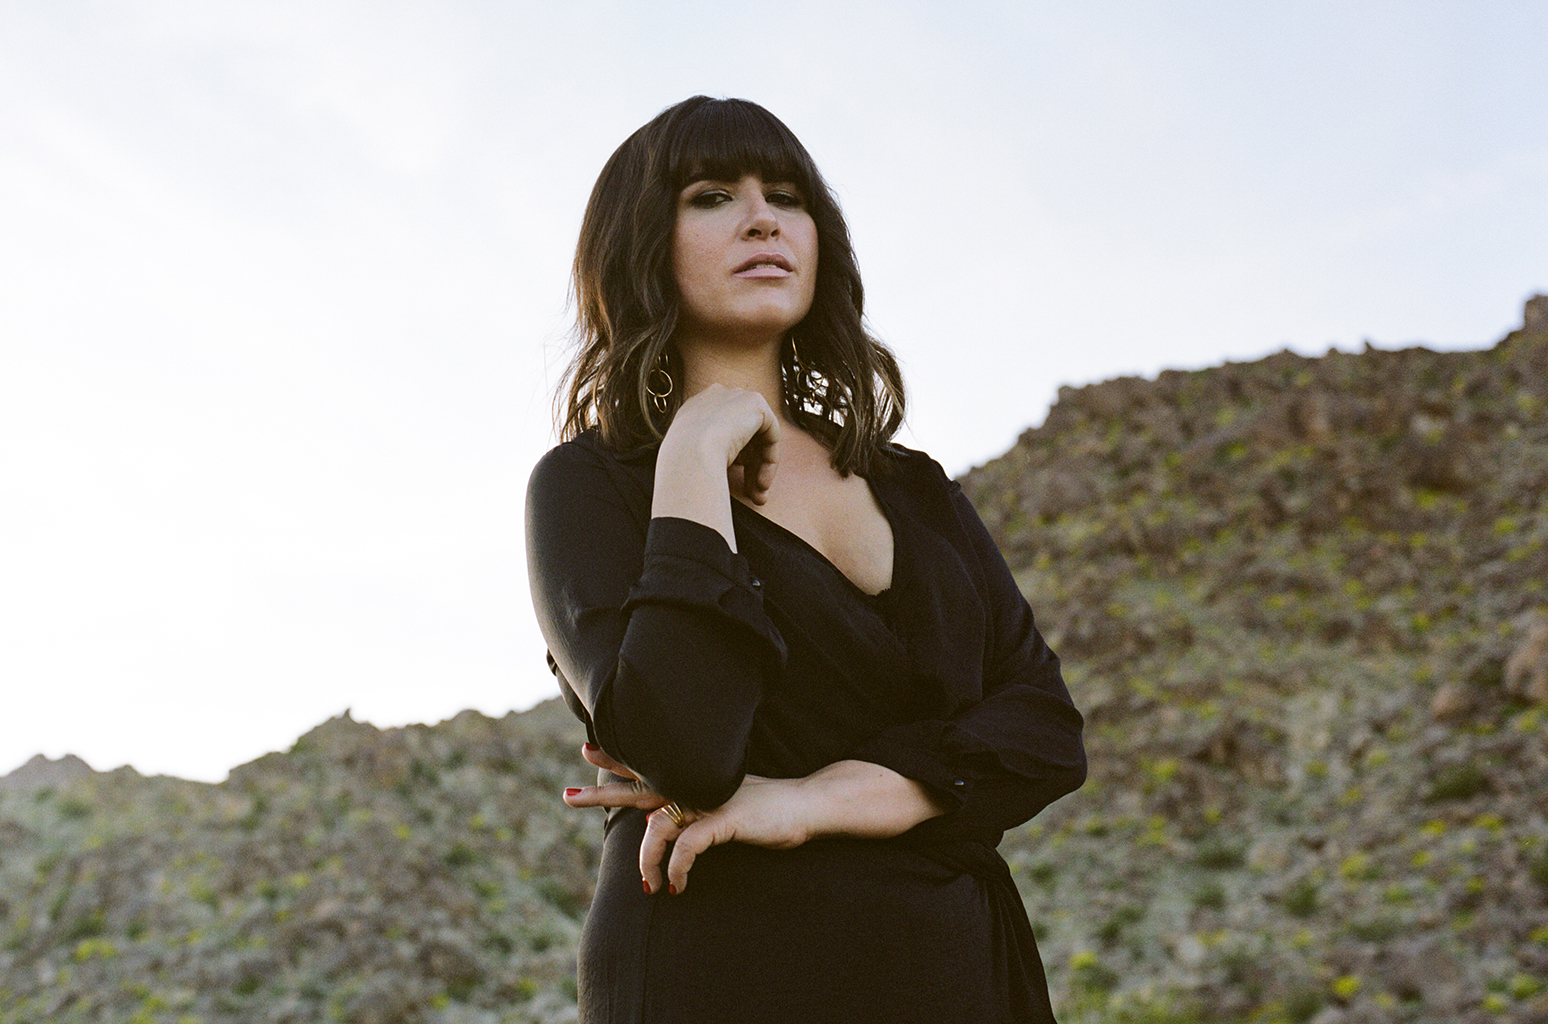 Press photo of Emily Warren in front of mountains